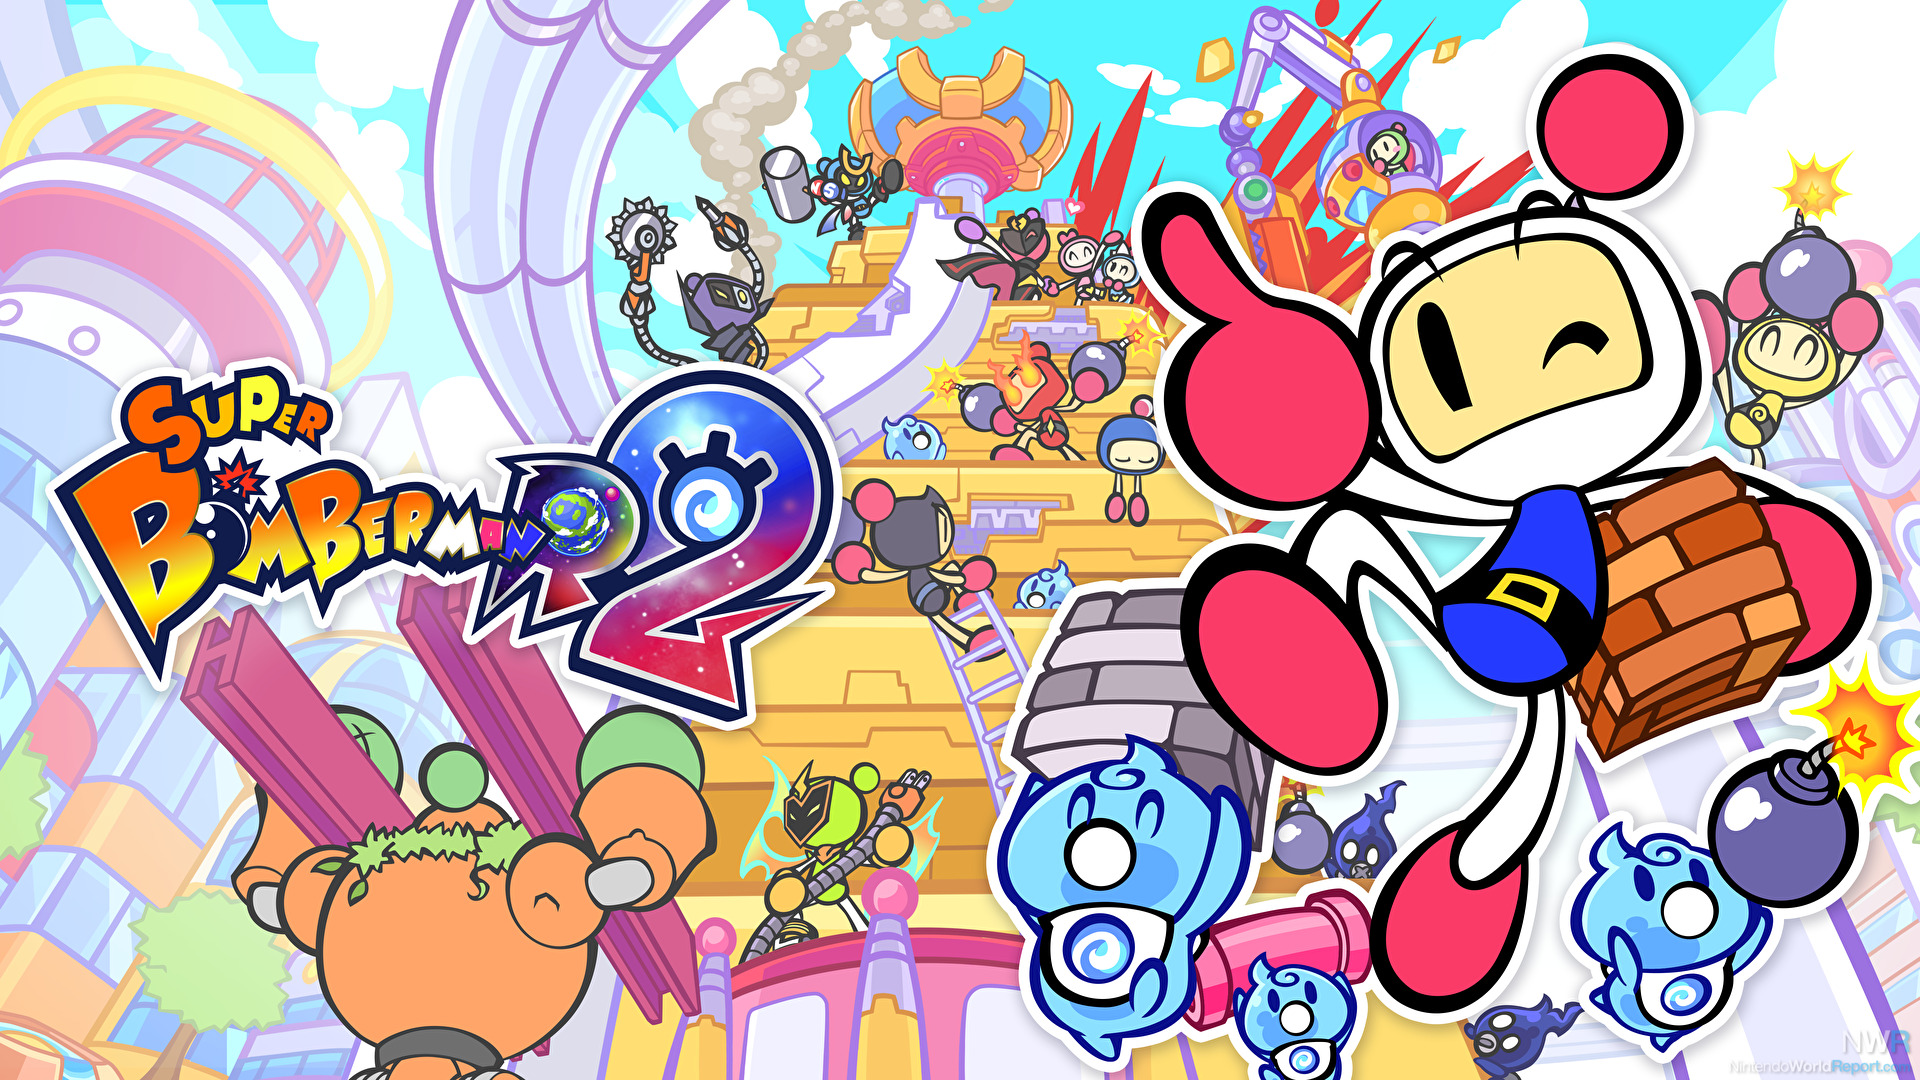 Super Bomberman 3: All Bosses & Ending (No Comentary) (2 Players) HD 